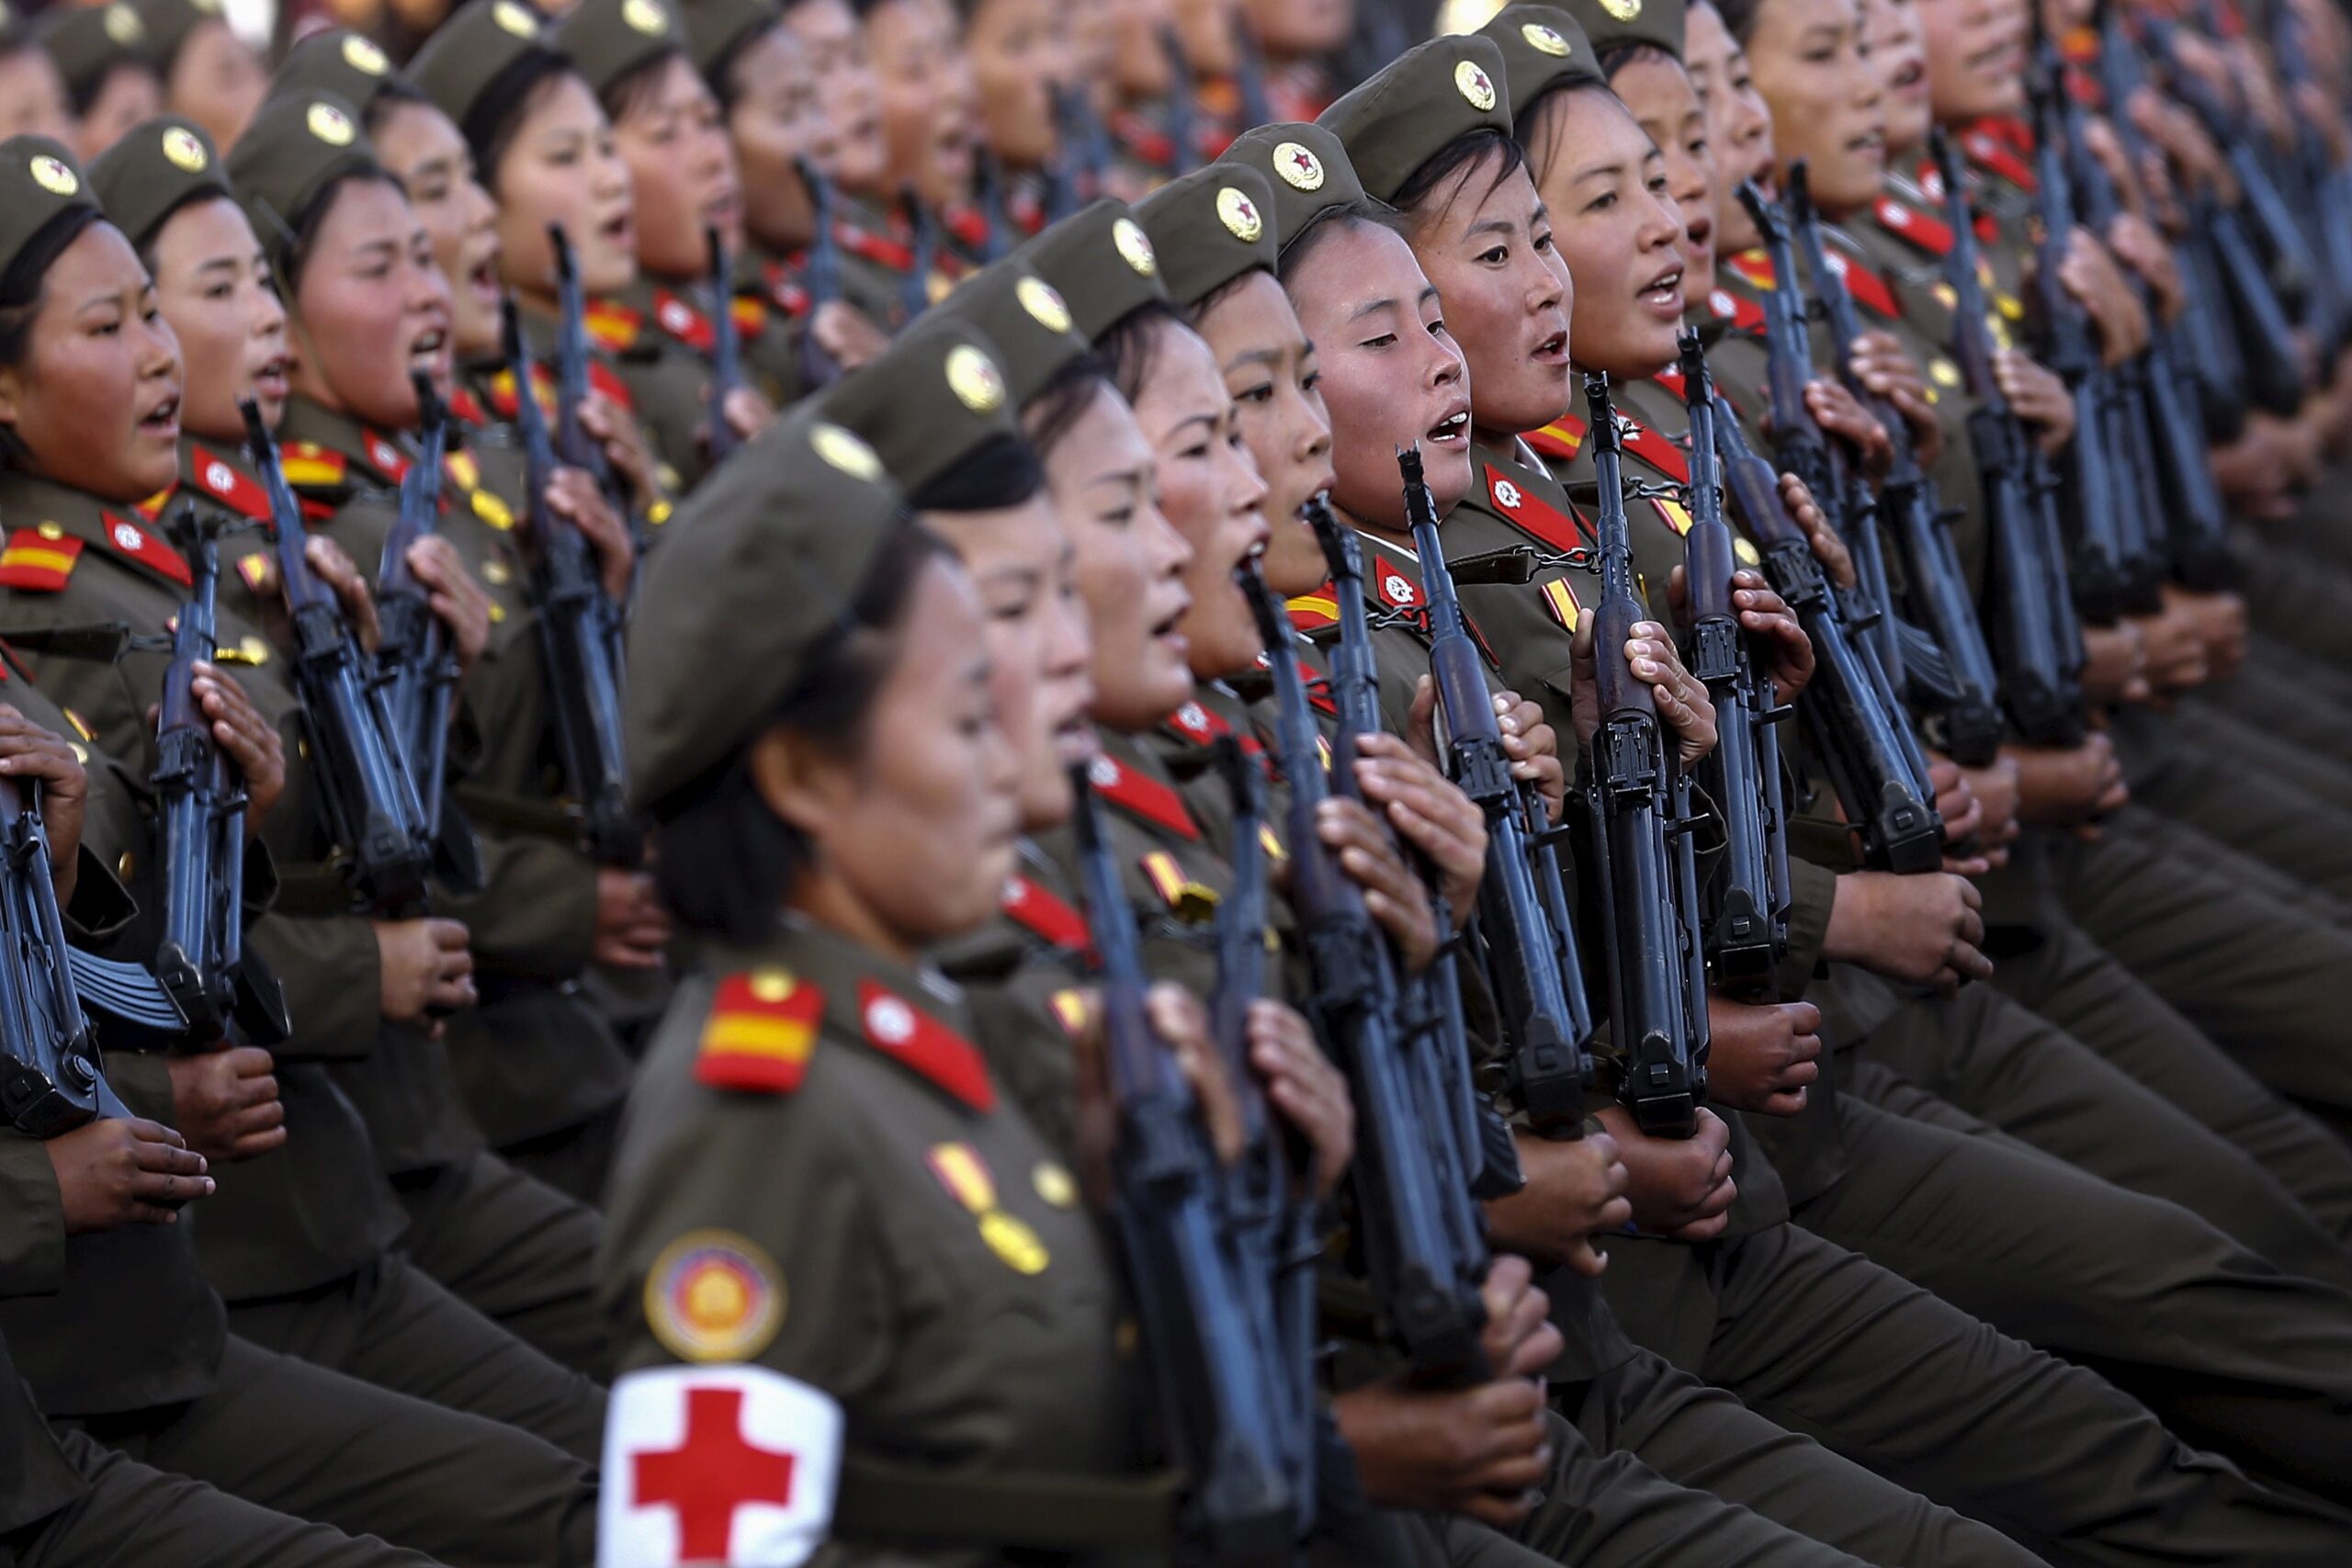 North Korean military soldiers assembled at an official event.